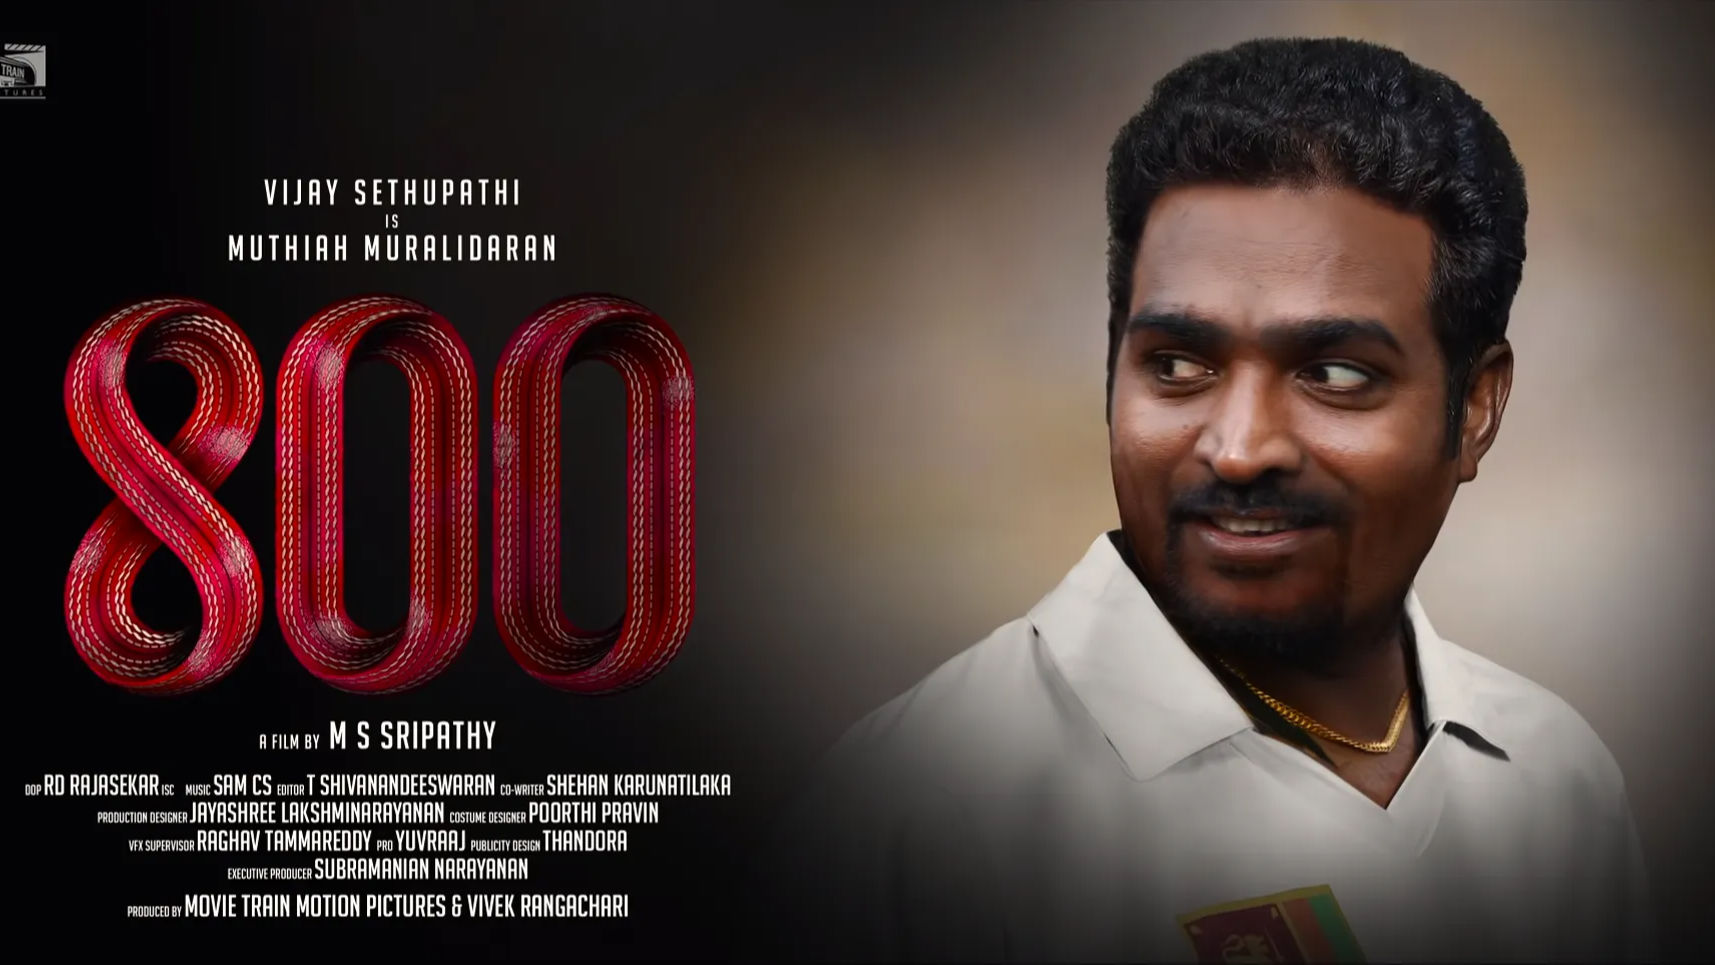 ‘Sell out’: Actor Vijay Sethupathi gets trolled for playing Lankan cricketer Muttiah Muralitharan